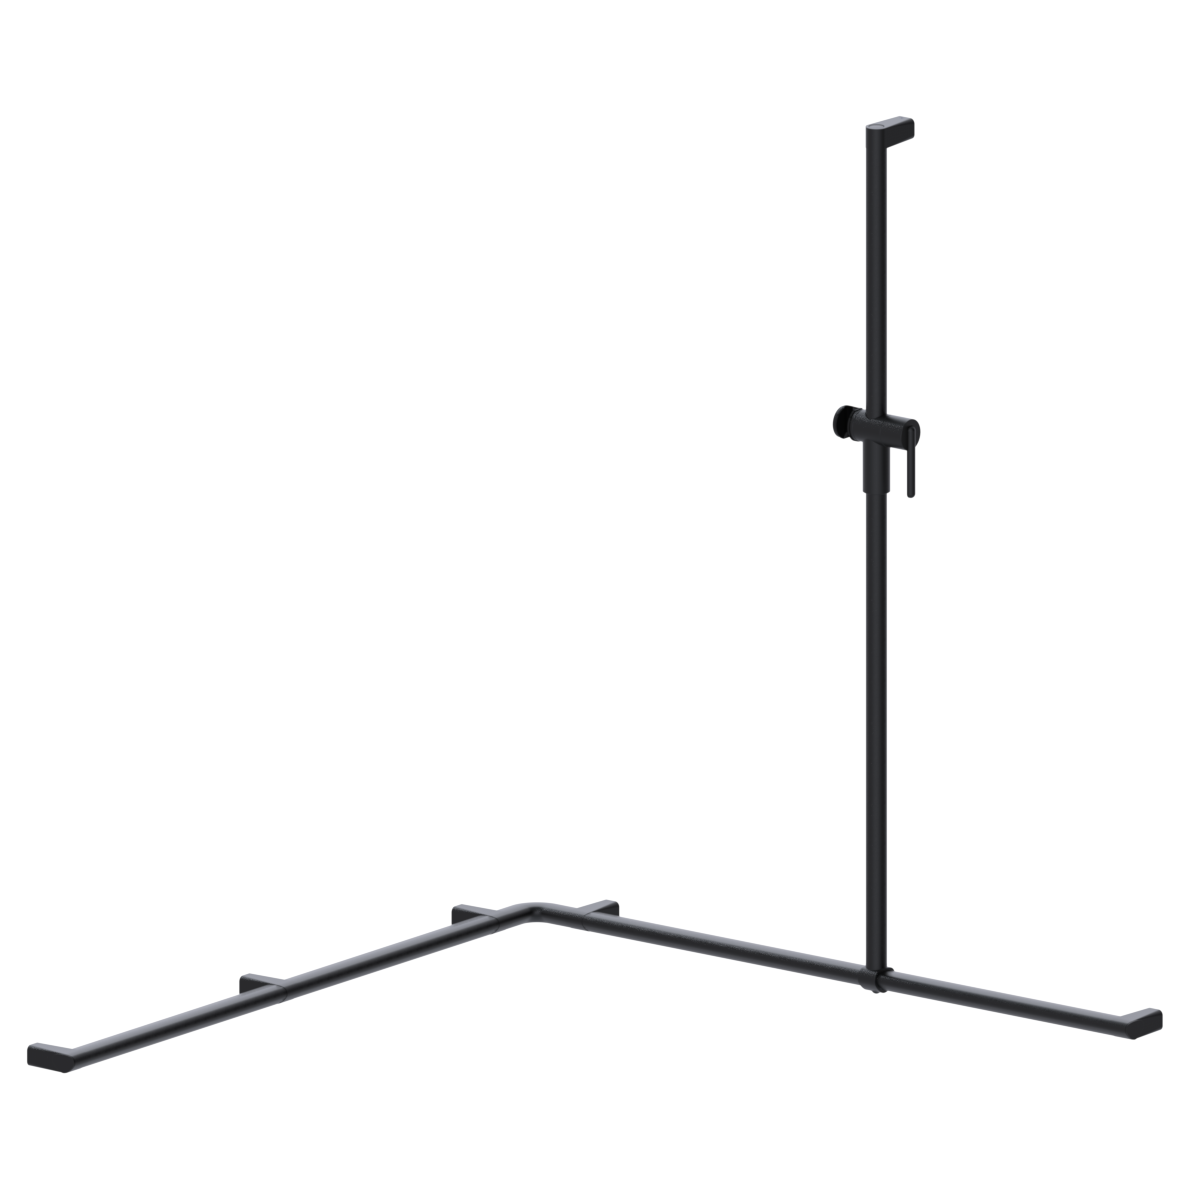 Cavere Care Shower handrail, with movable shower handrail, right, 1100 x 1100 x 1200 mm, single-point mounting, Cavere Carbon black